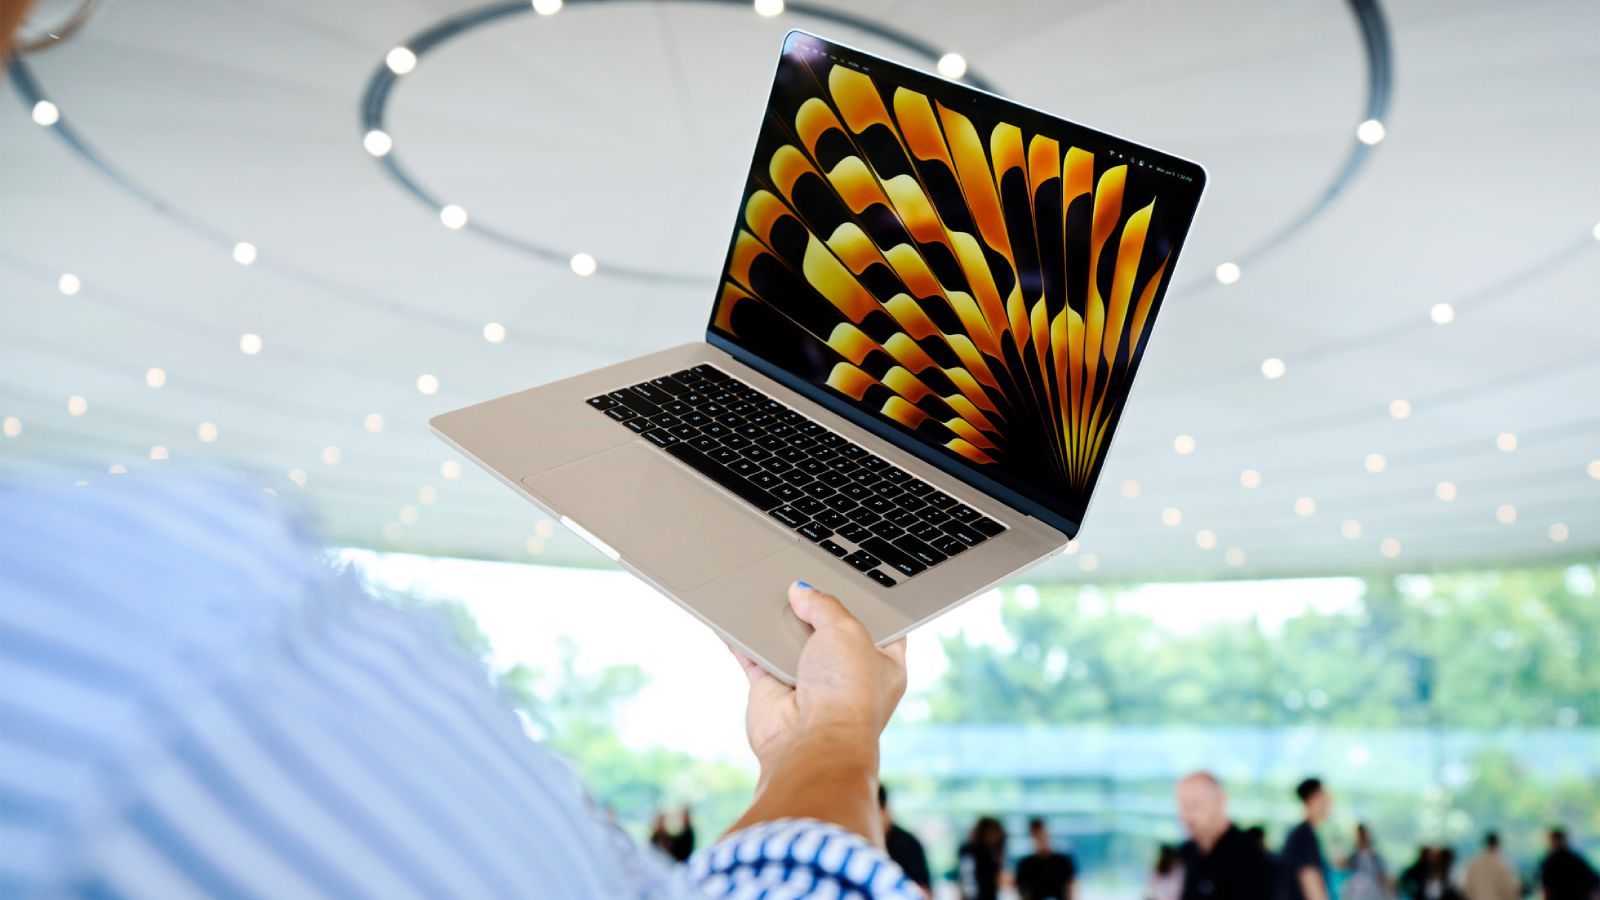 15-inch MacBook Air hands-on: Just what some folks were asking for